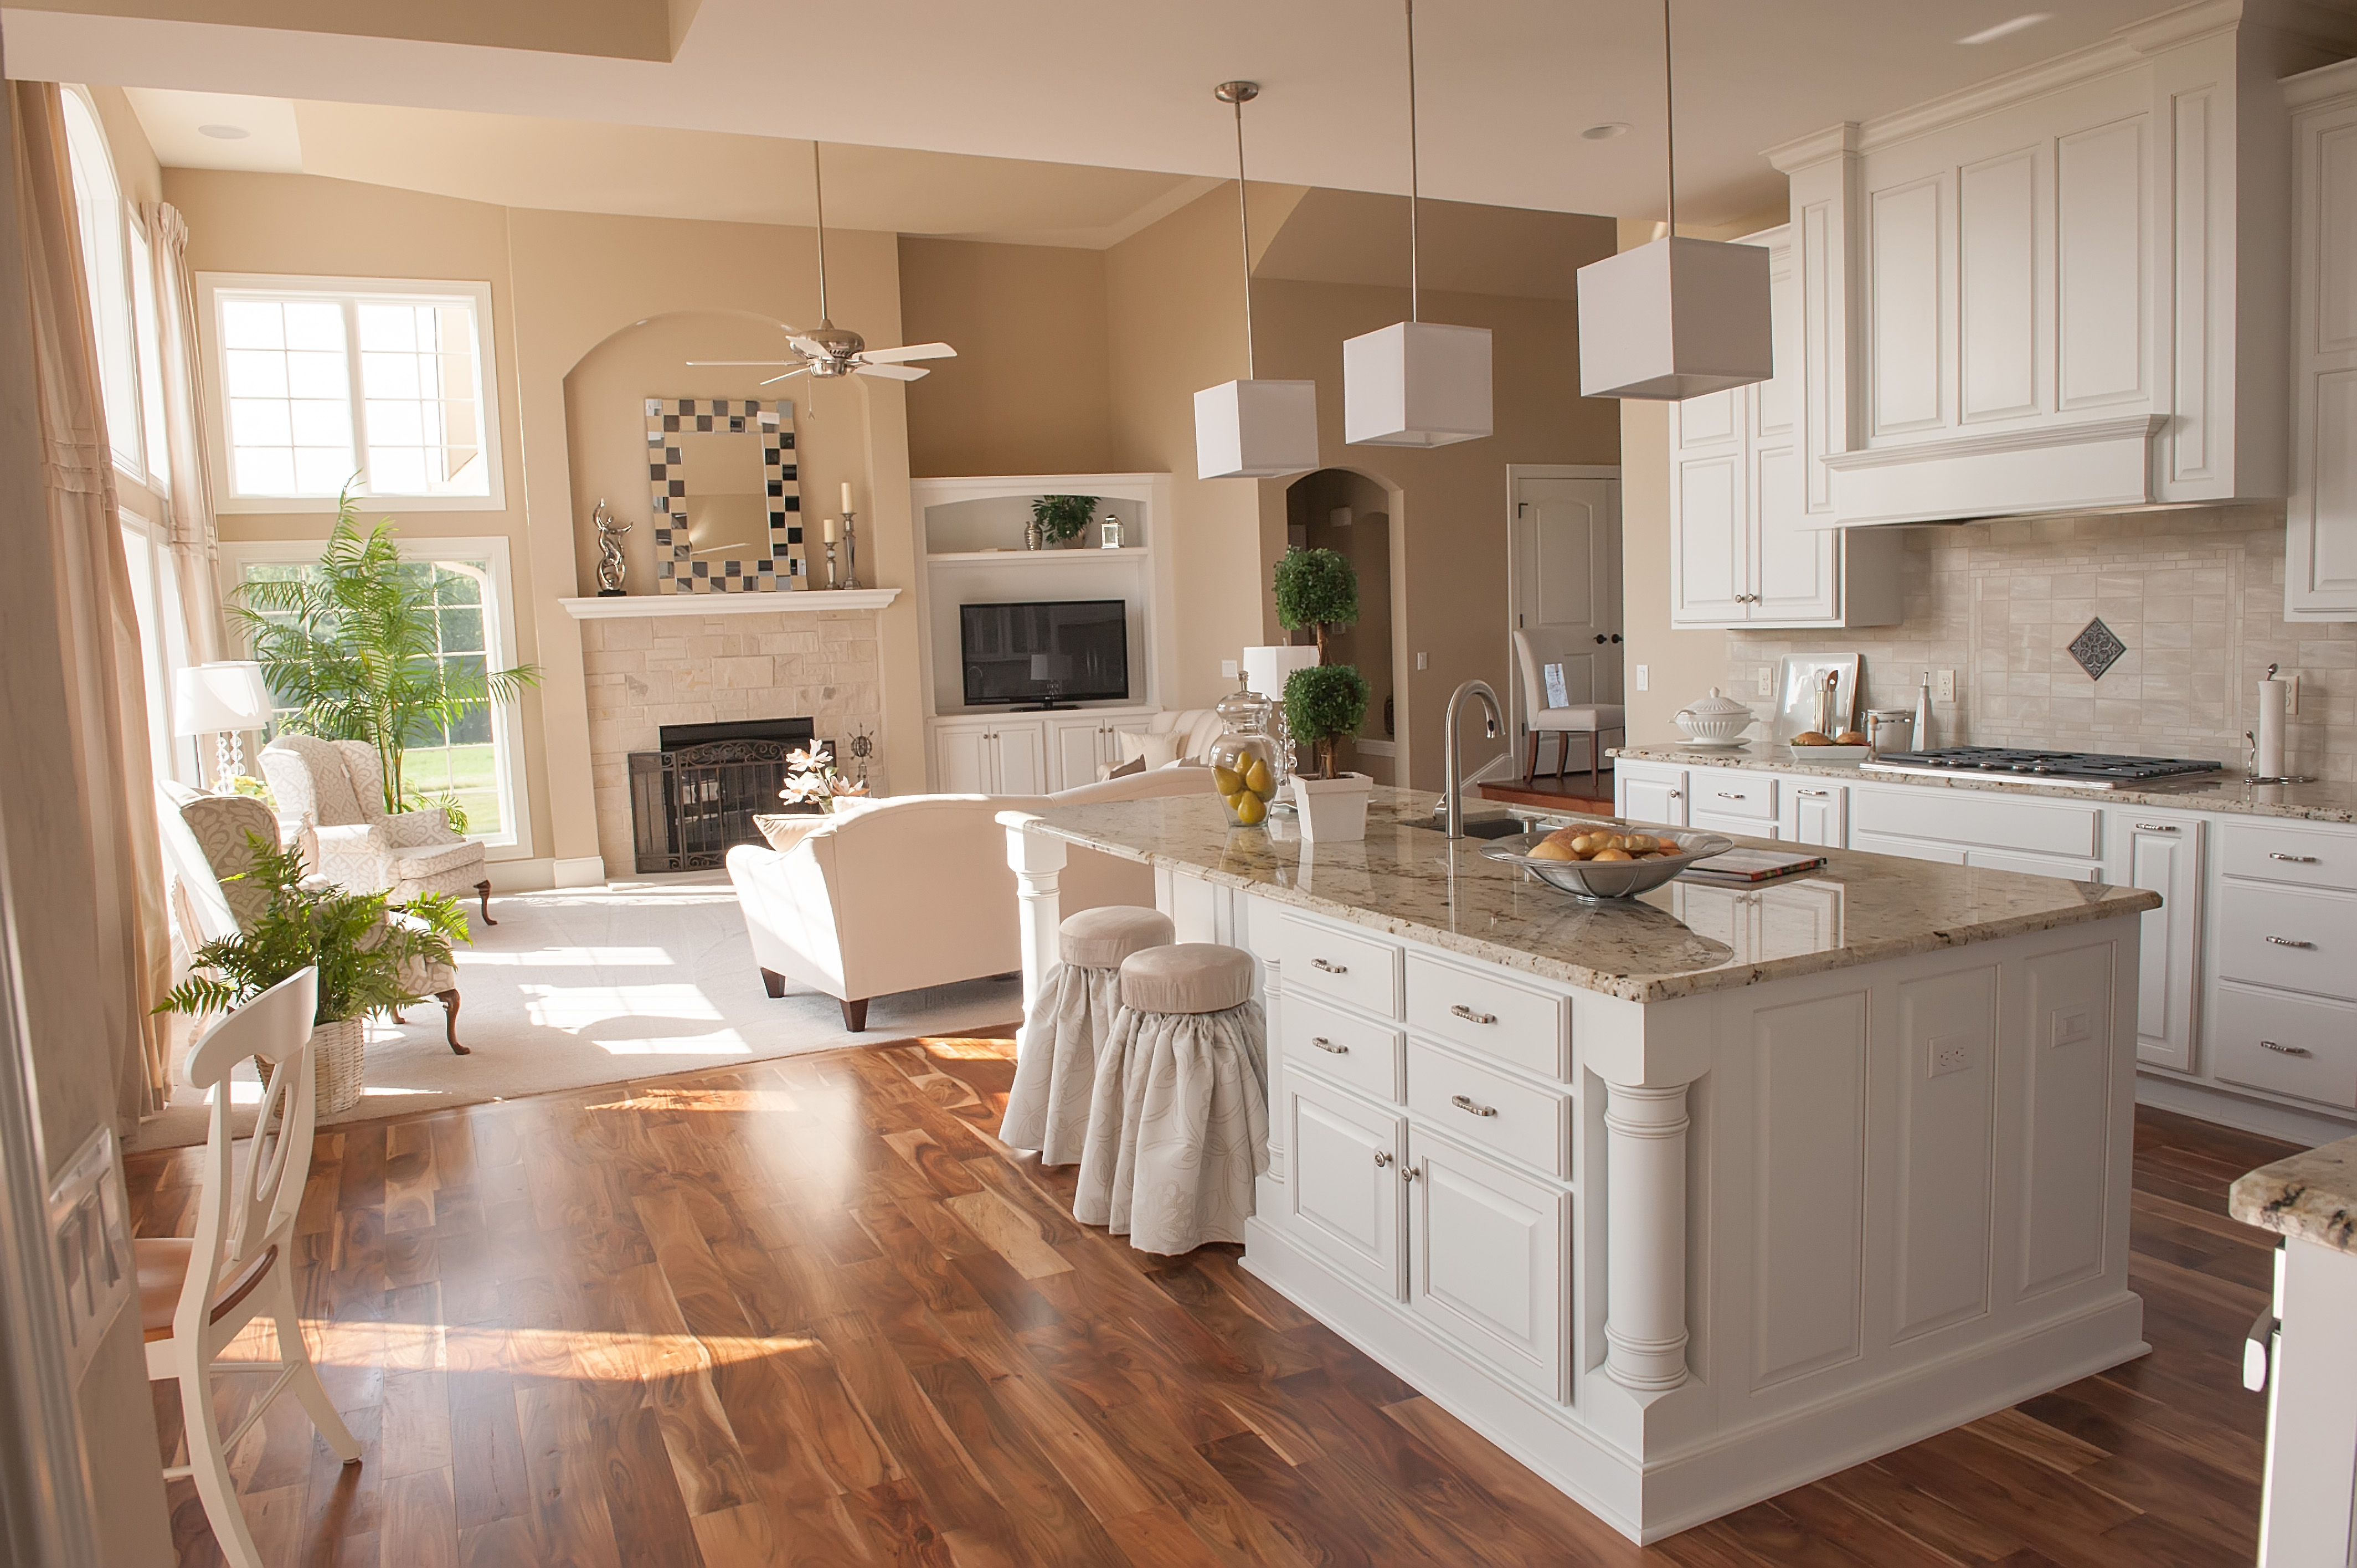 A luxury kitchen with traitional styled cabinets using standard overlay door construction for a classic look.